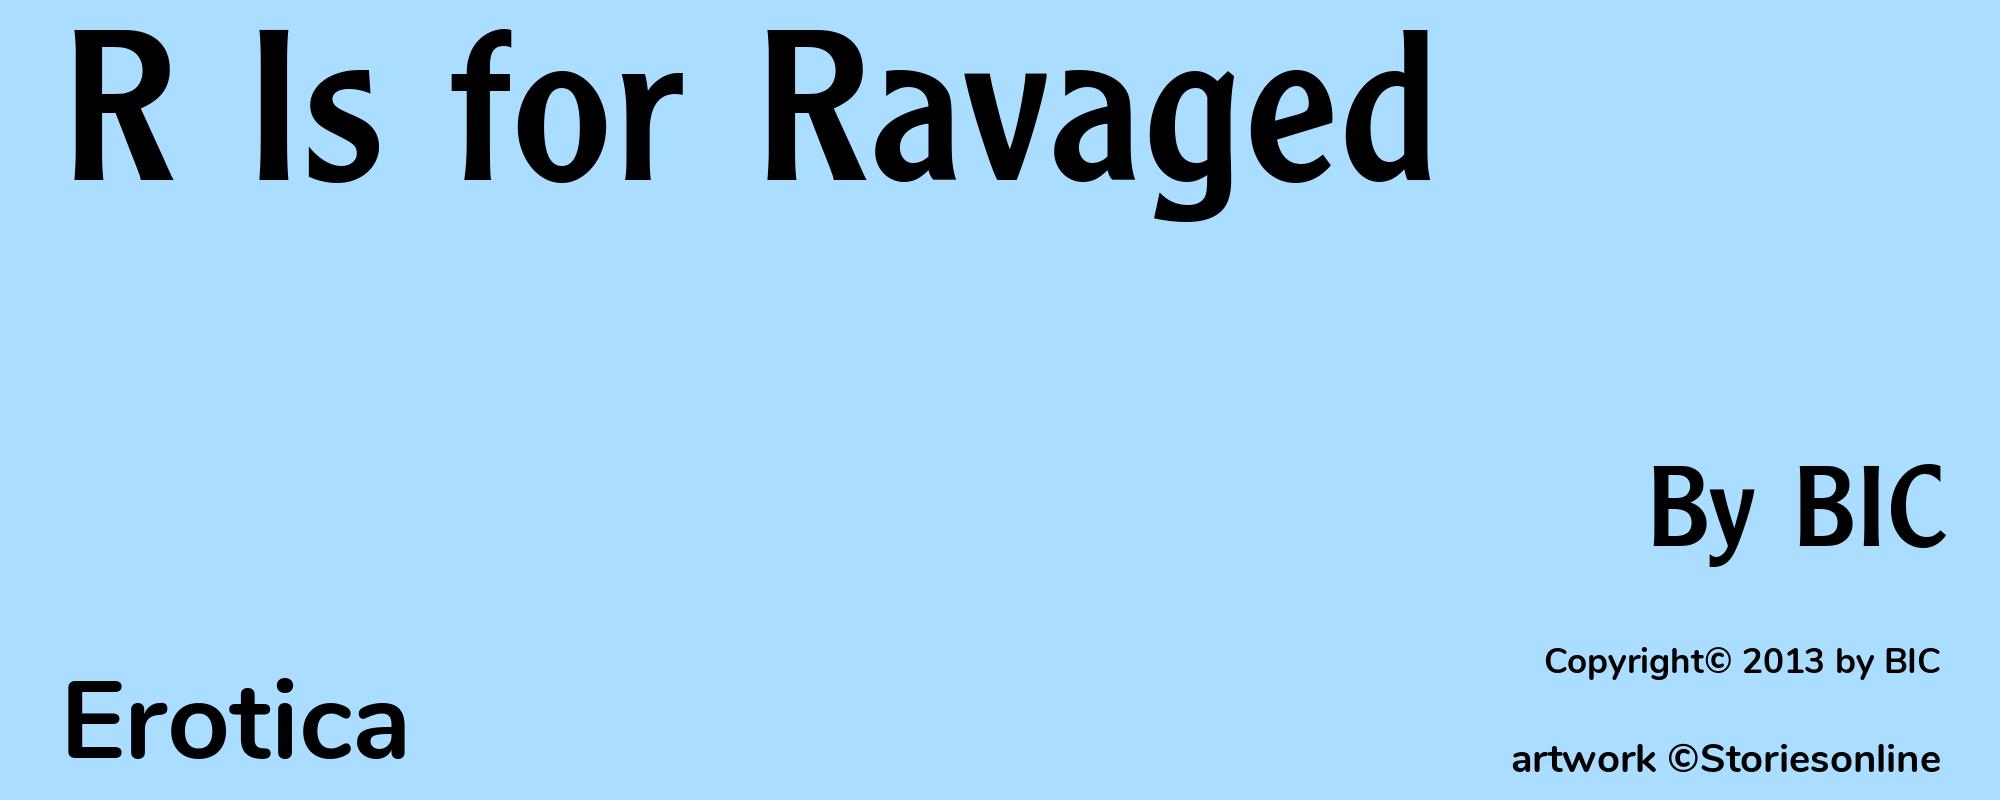 R Is for Ravaged - Cover